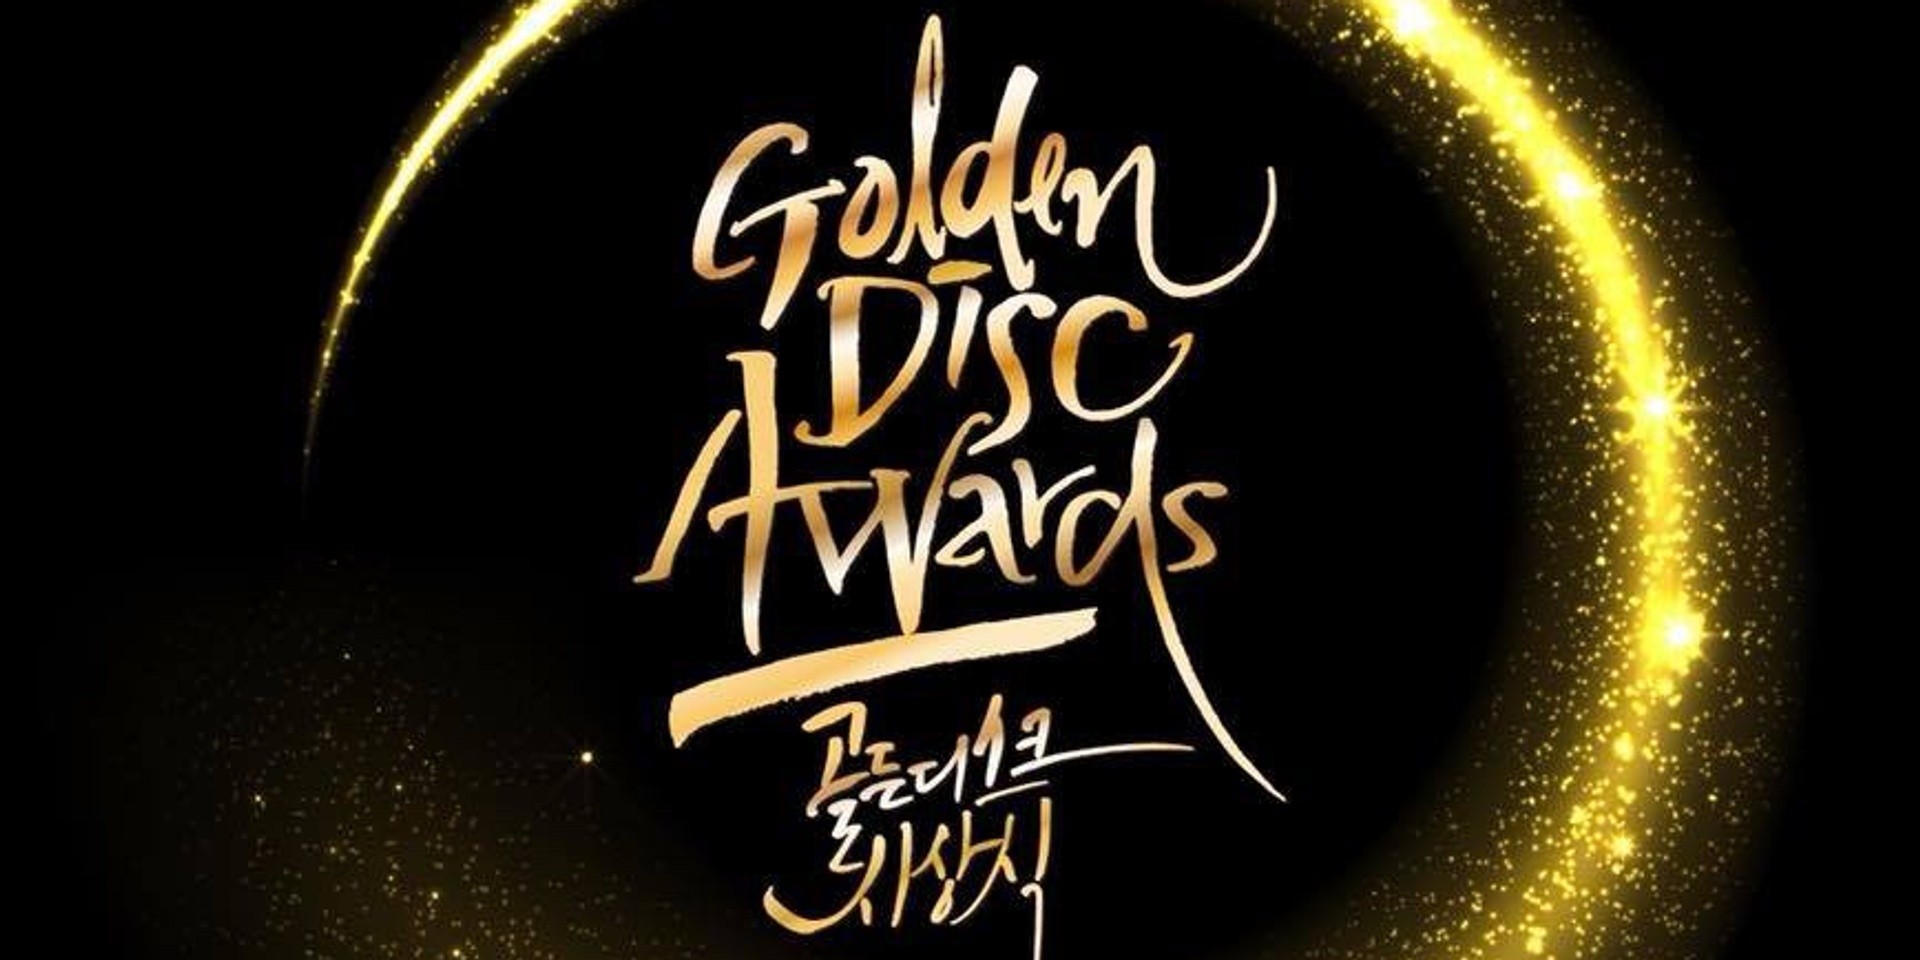 GDA Secretariat: "The location for the Golden Disc Awards is not confirmed yet."